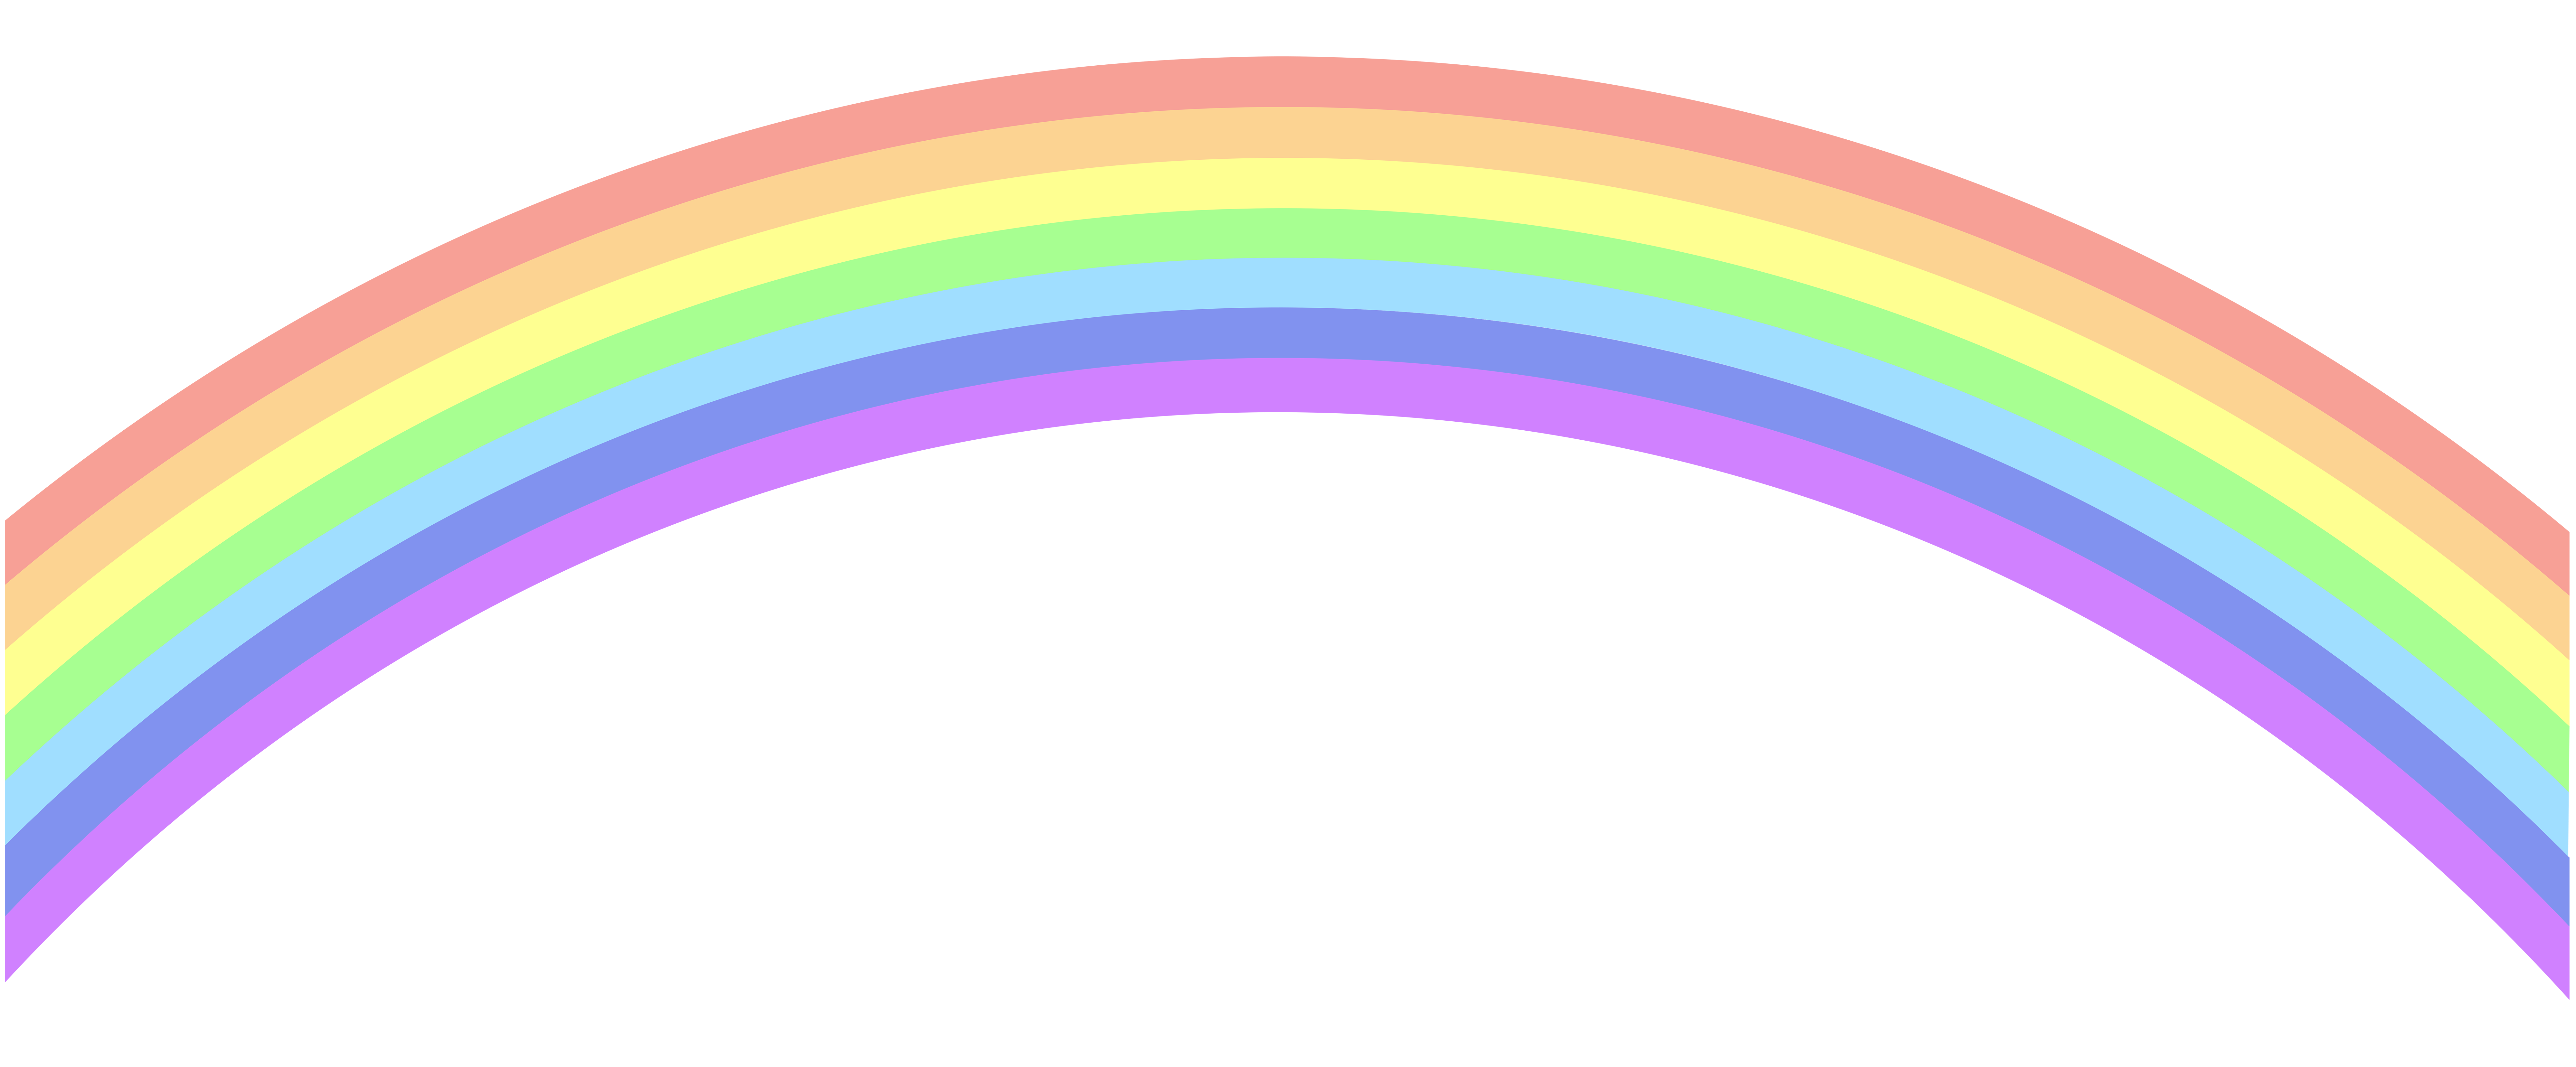 free clipart images rainbow - photo #17